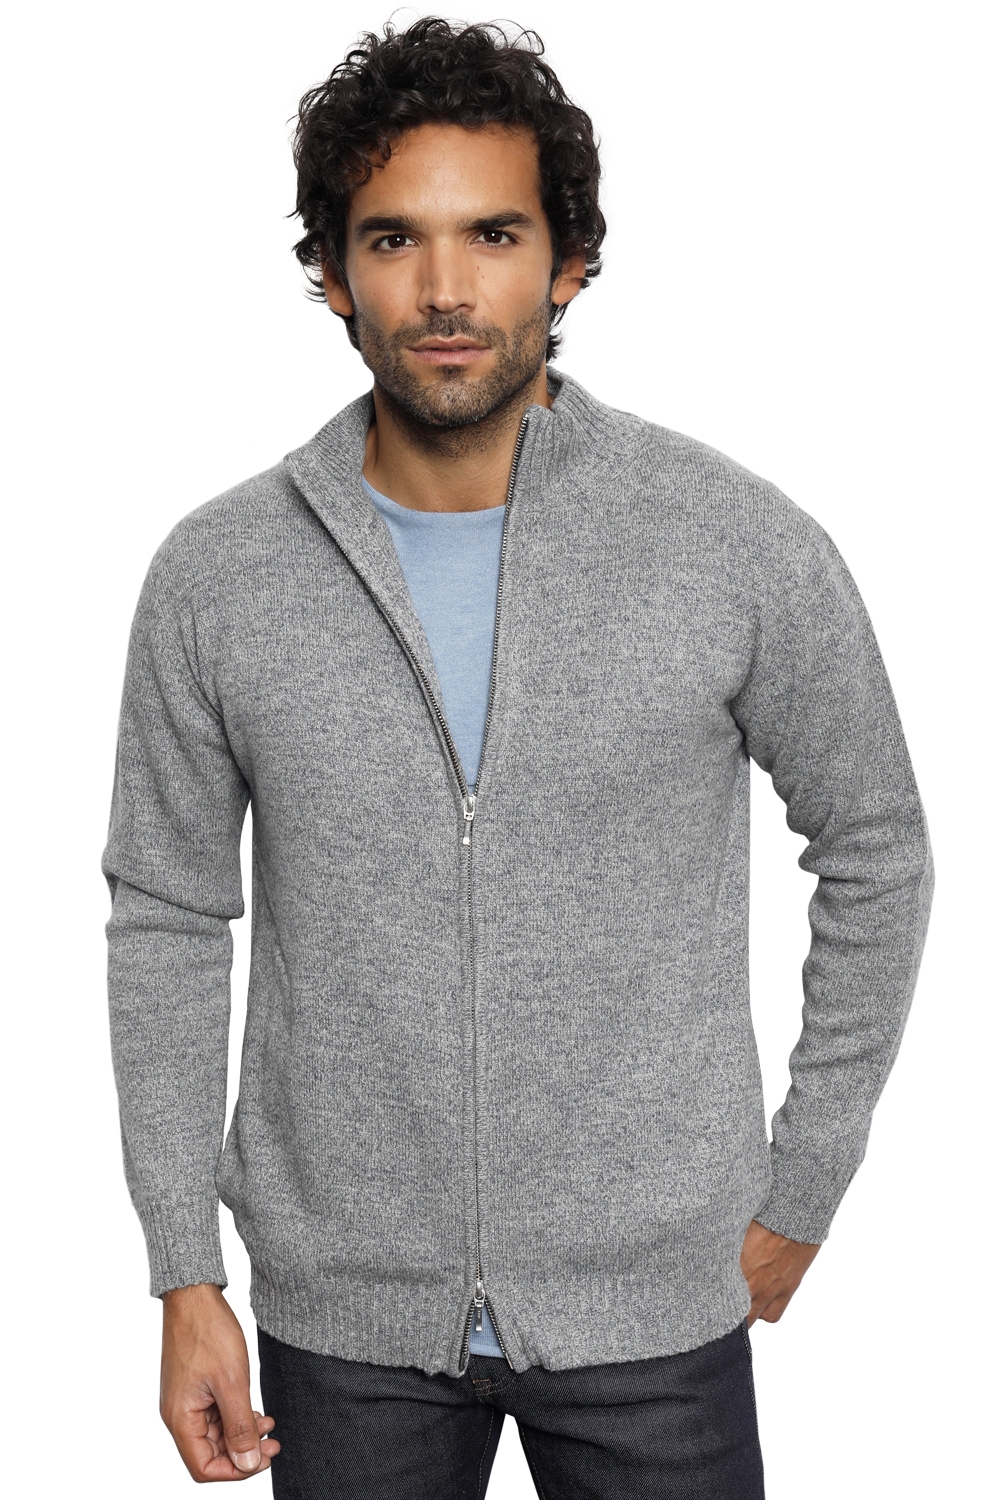 Chameau pull homme clyde pierre 3xl